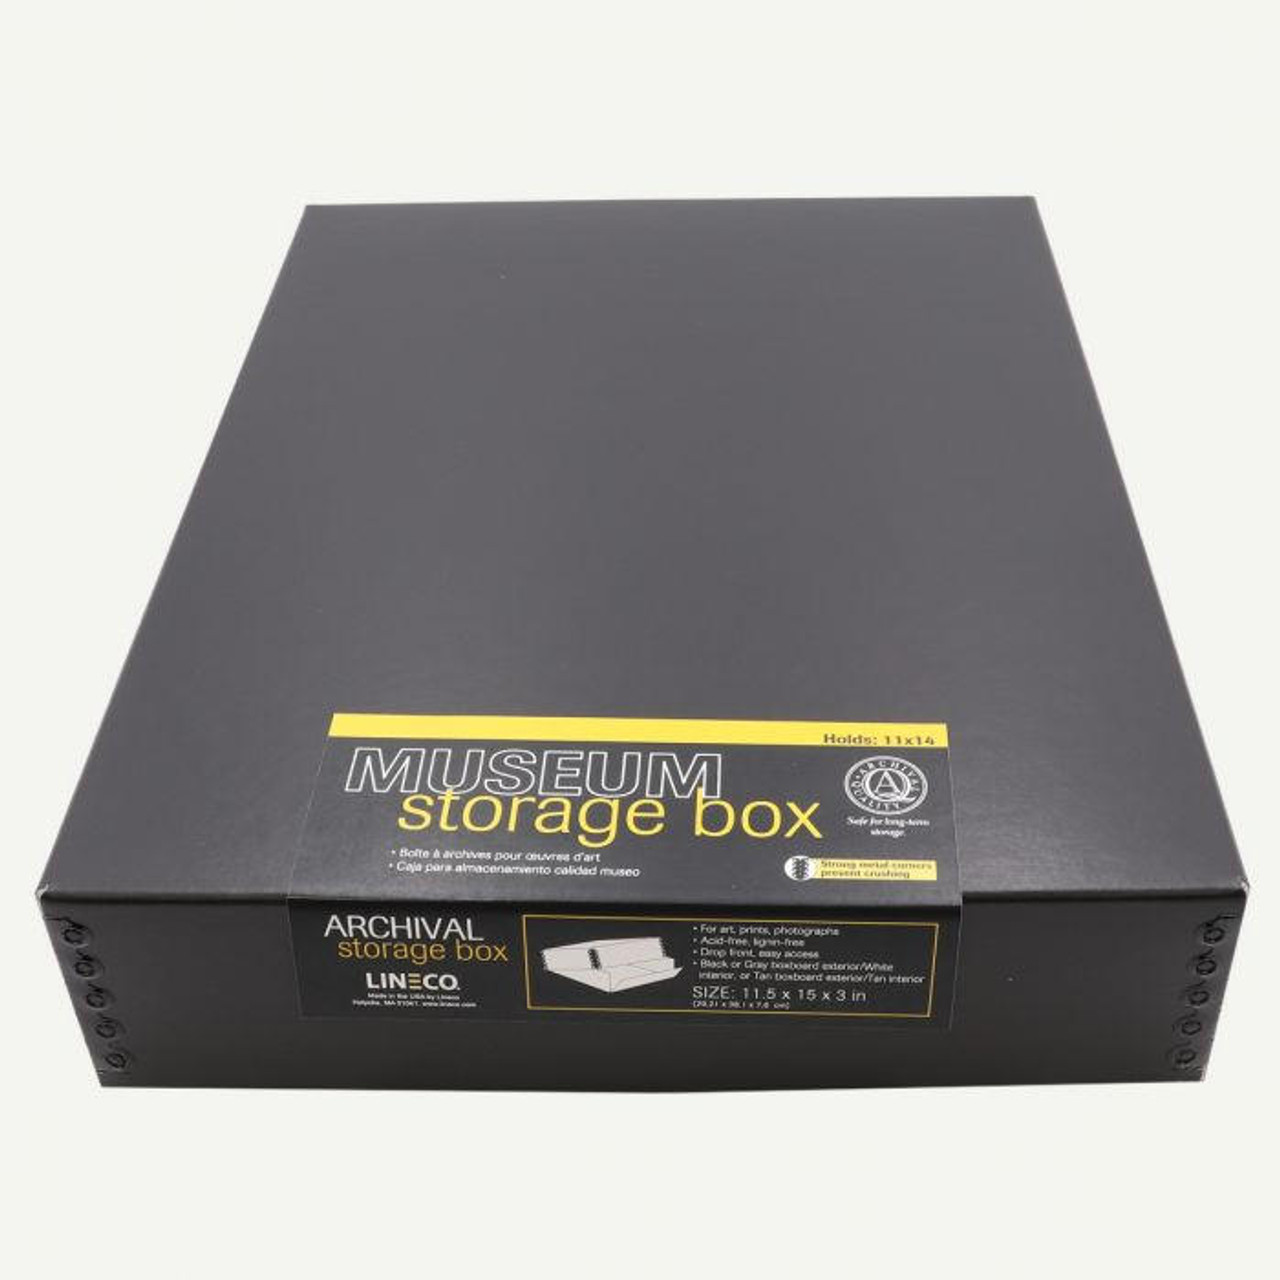 Acid-free Archive Storage Boxes - Clamshell Design